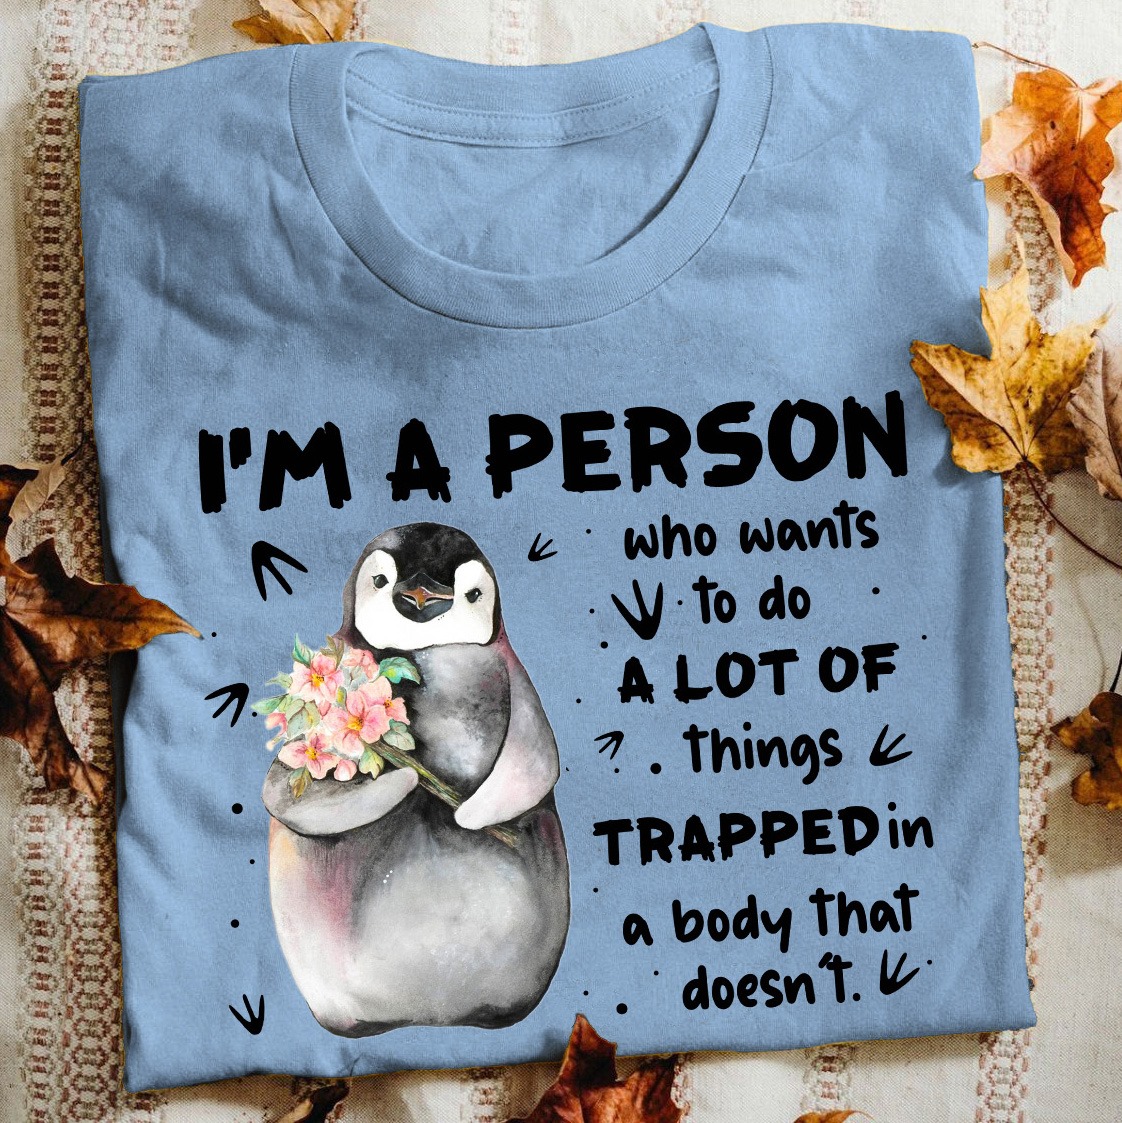 I'm a person who wants to do a lot of things trapped in a body that doesn't - T-shirt for penguins lover